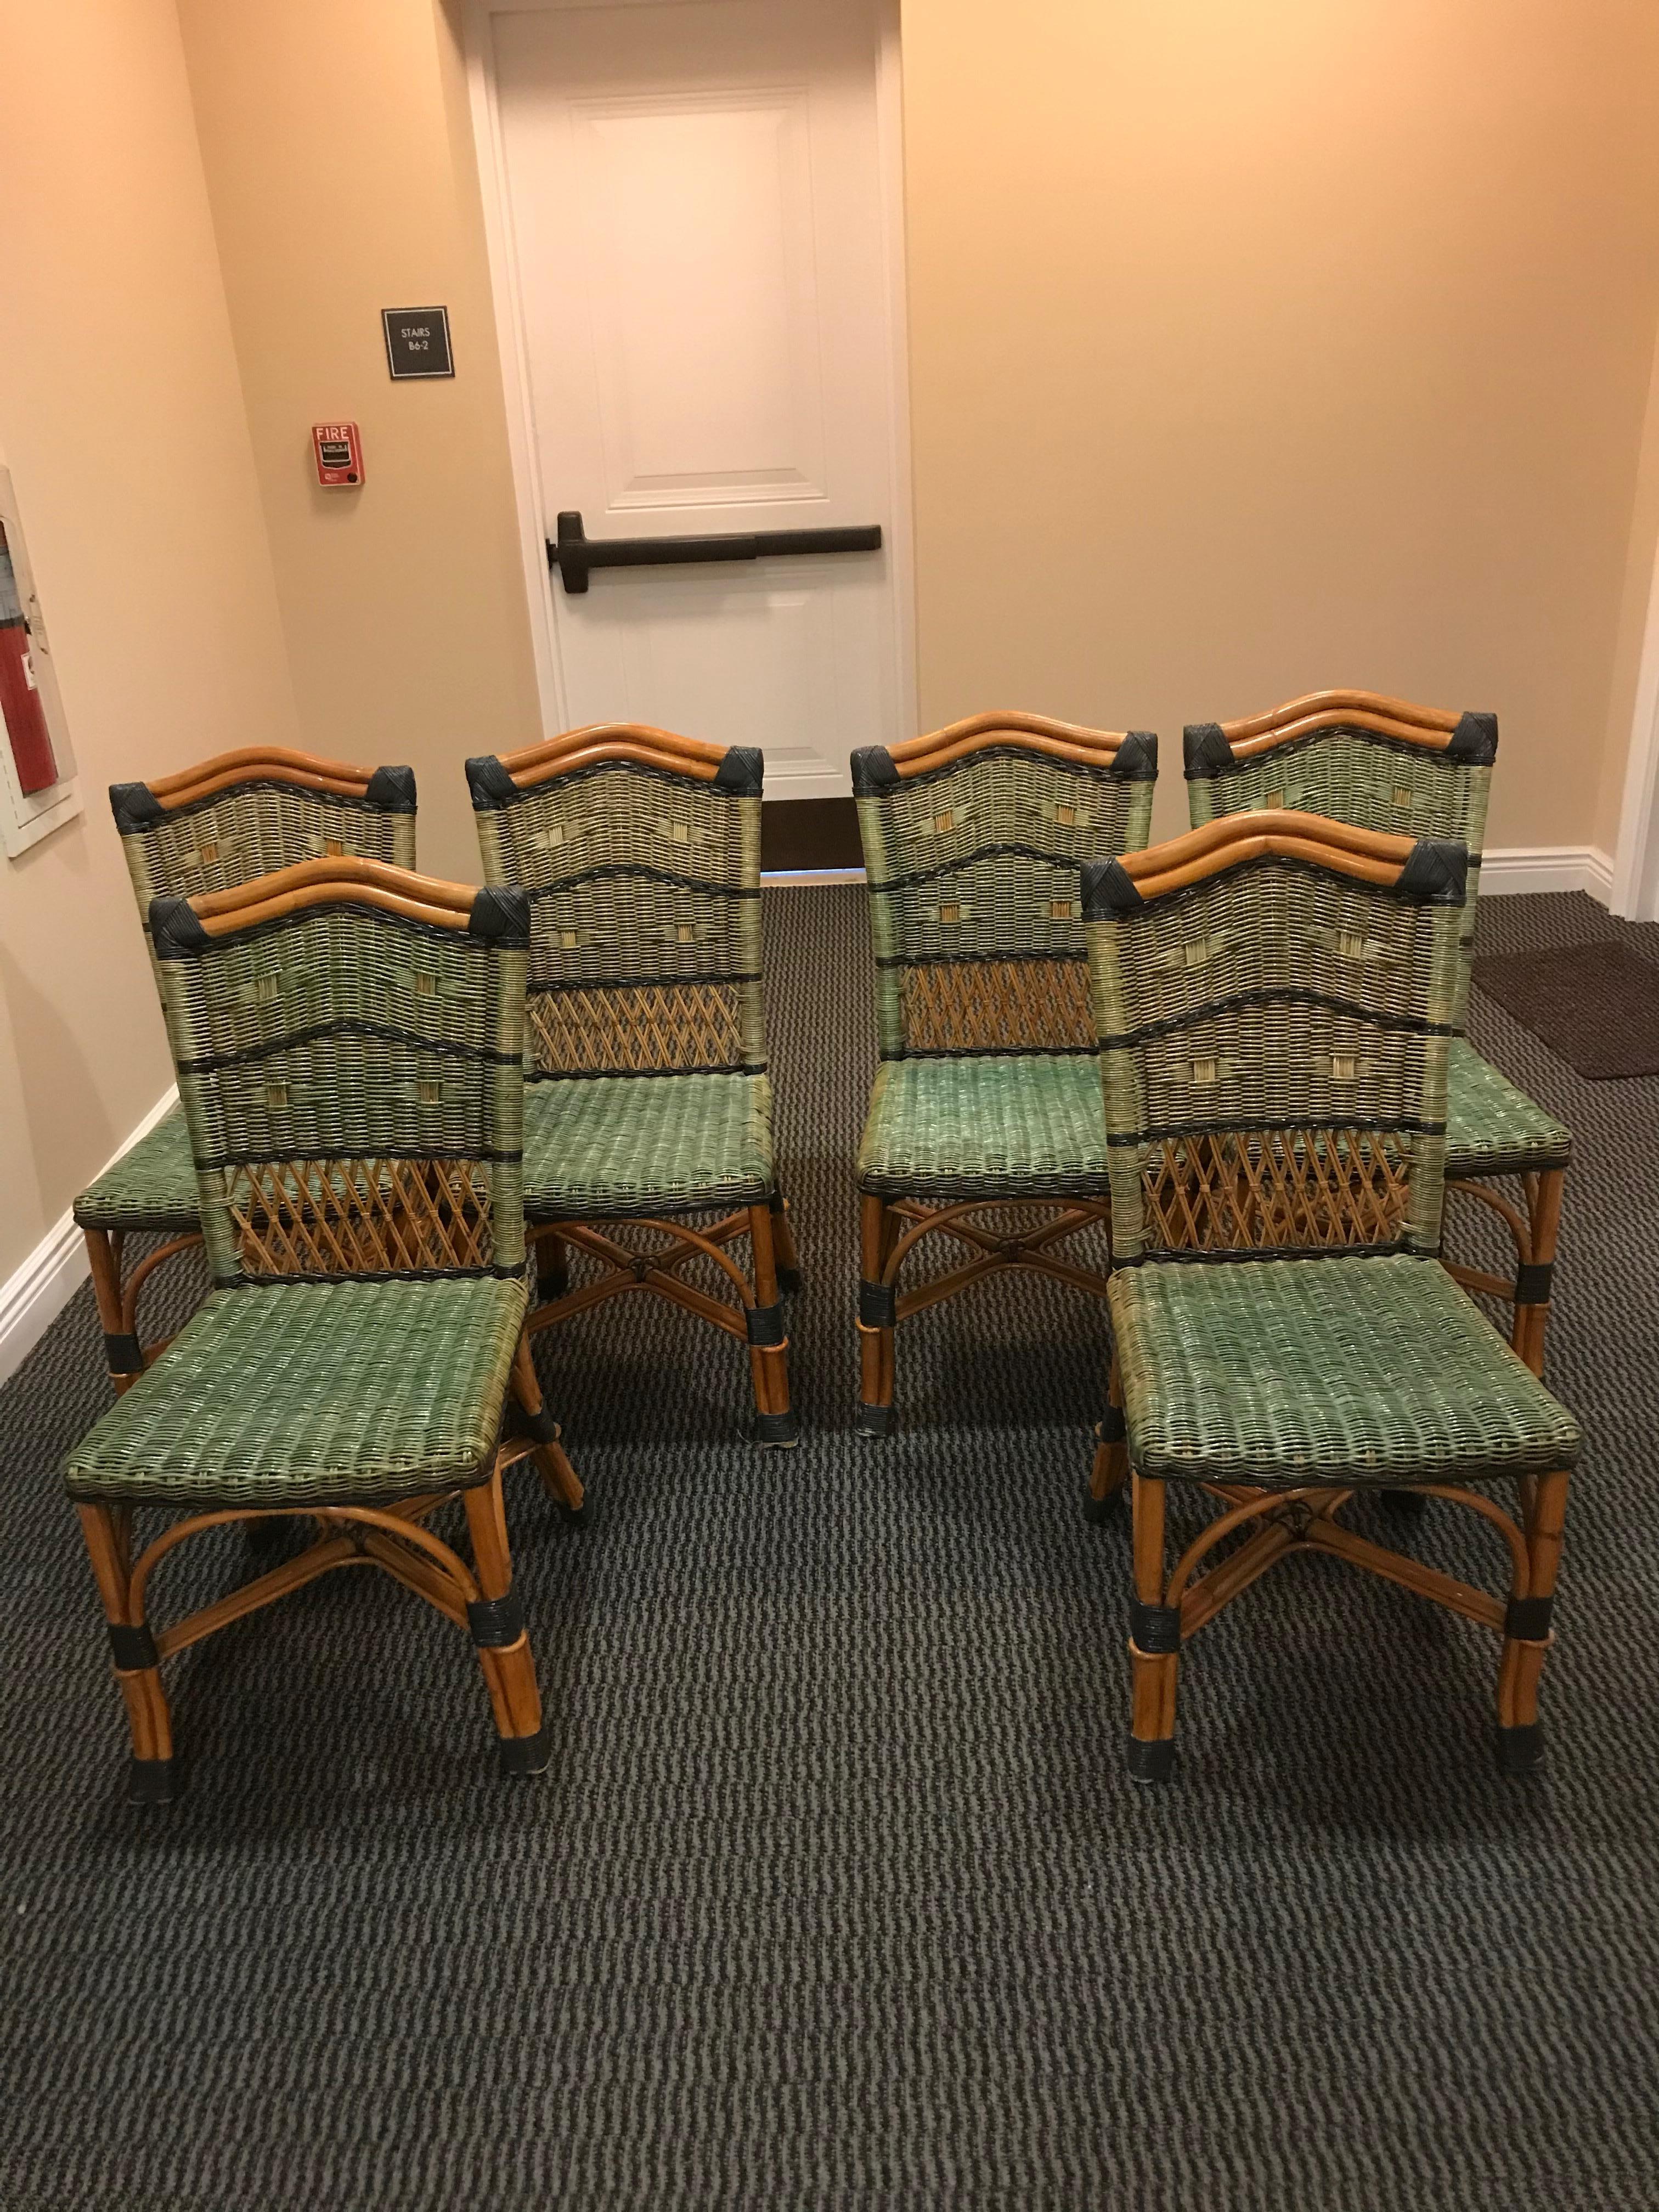 A stunning set of 8 Grange rattan chairs from the 1970s are an inviting color combination of natural honey colored wood with dark and light green on seats. The coiled rattan on legs is dark green.
6 sides and 2 arm.
Side chairs measure: 37” H, 18”